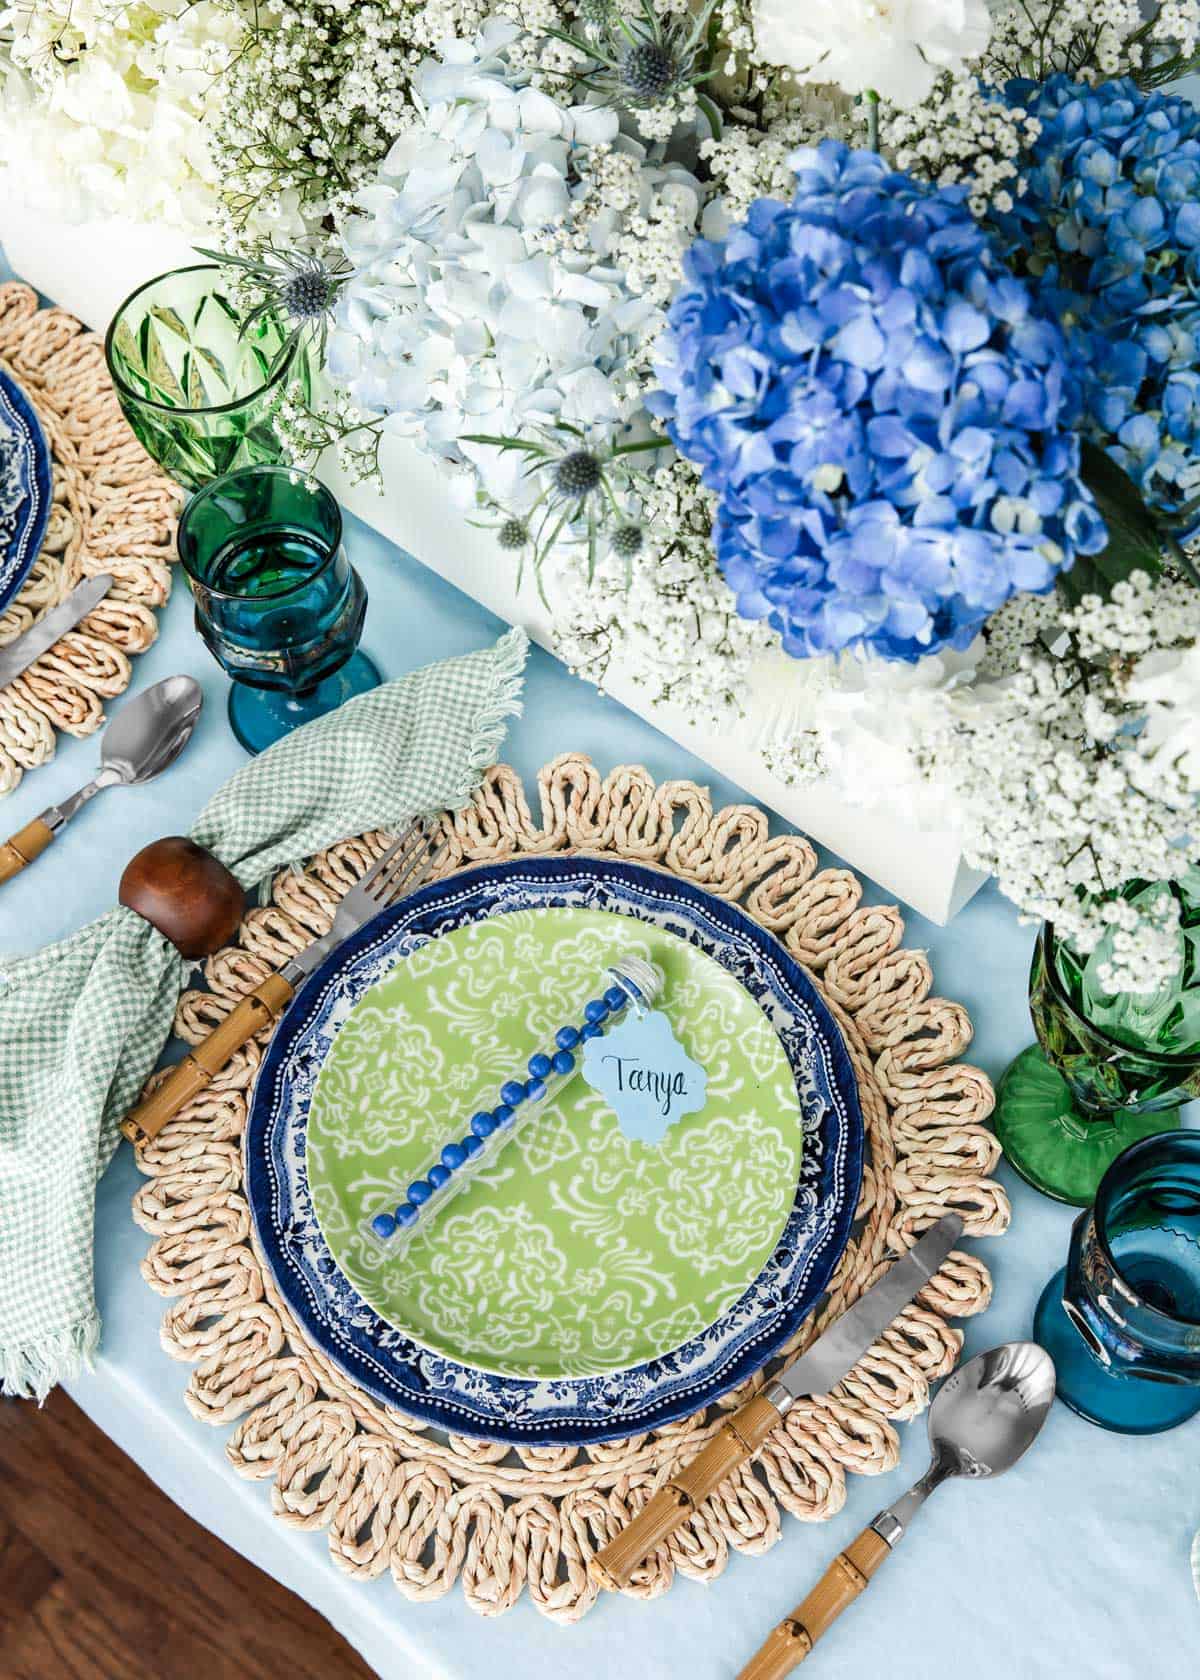 table setting with layered Blue Willow dinner plate and green salad plate on rattan place mat, with blue hydrangea centerpiece.